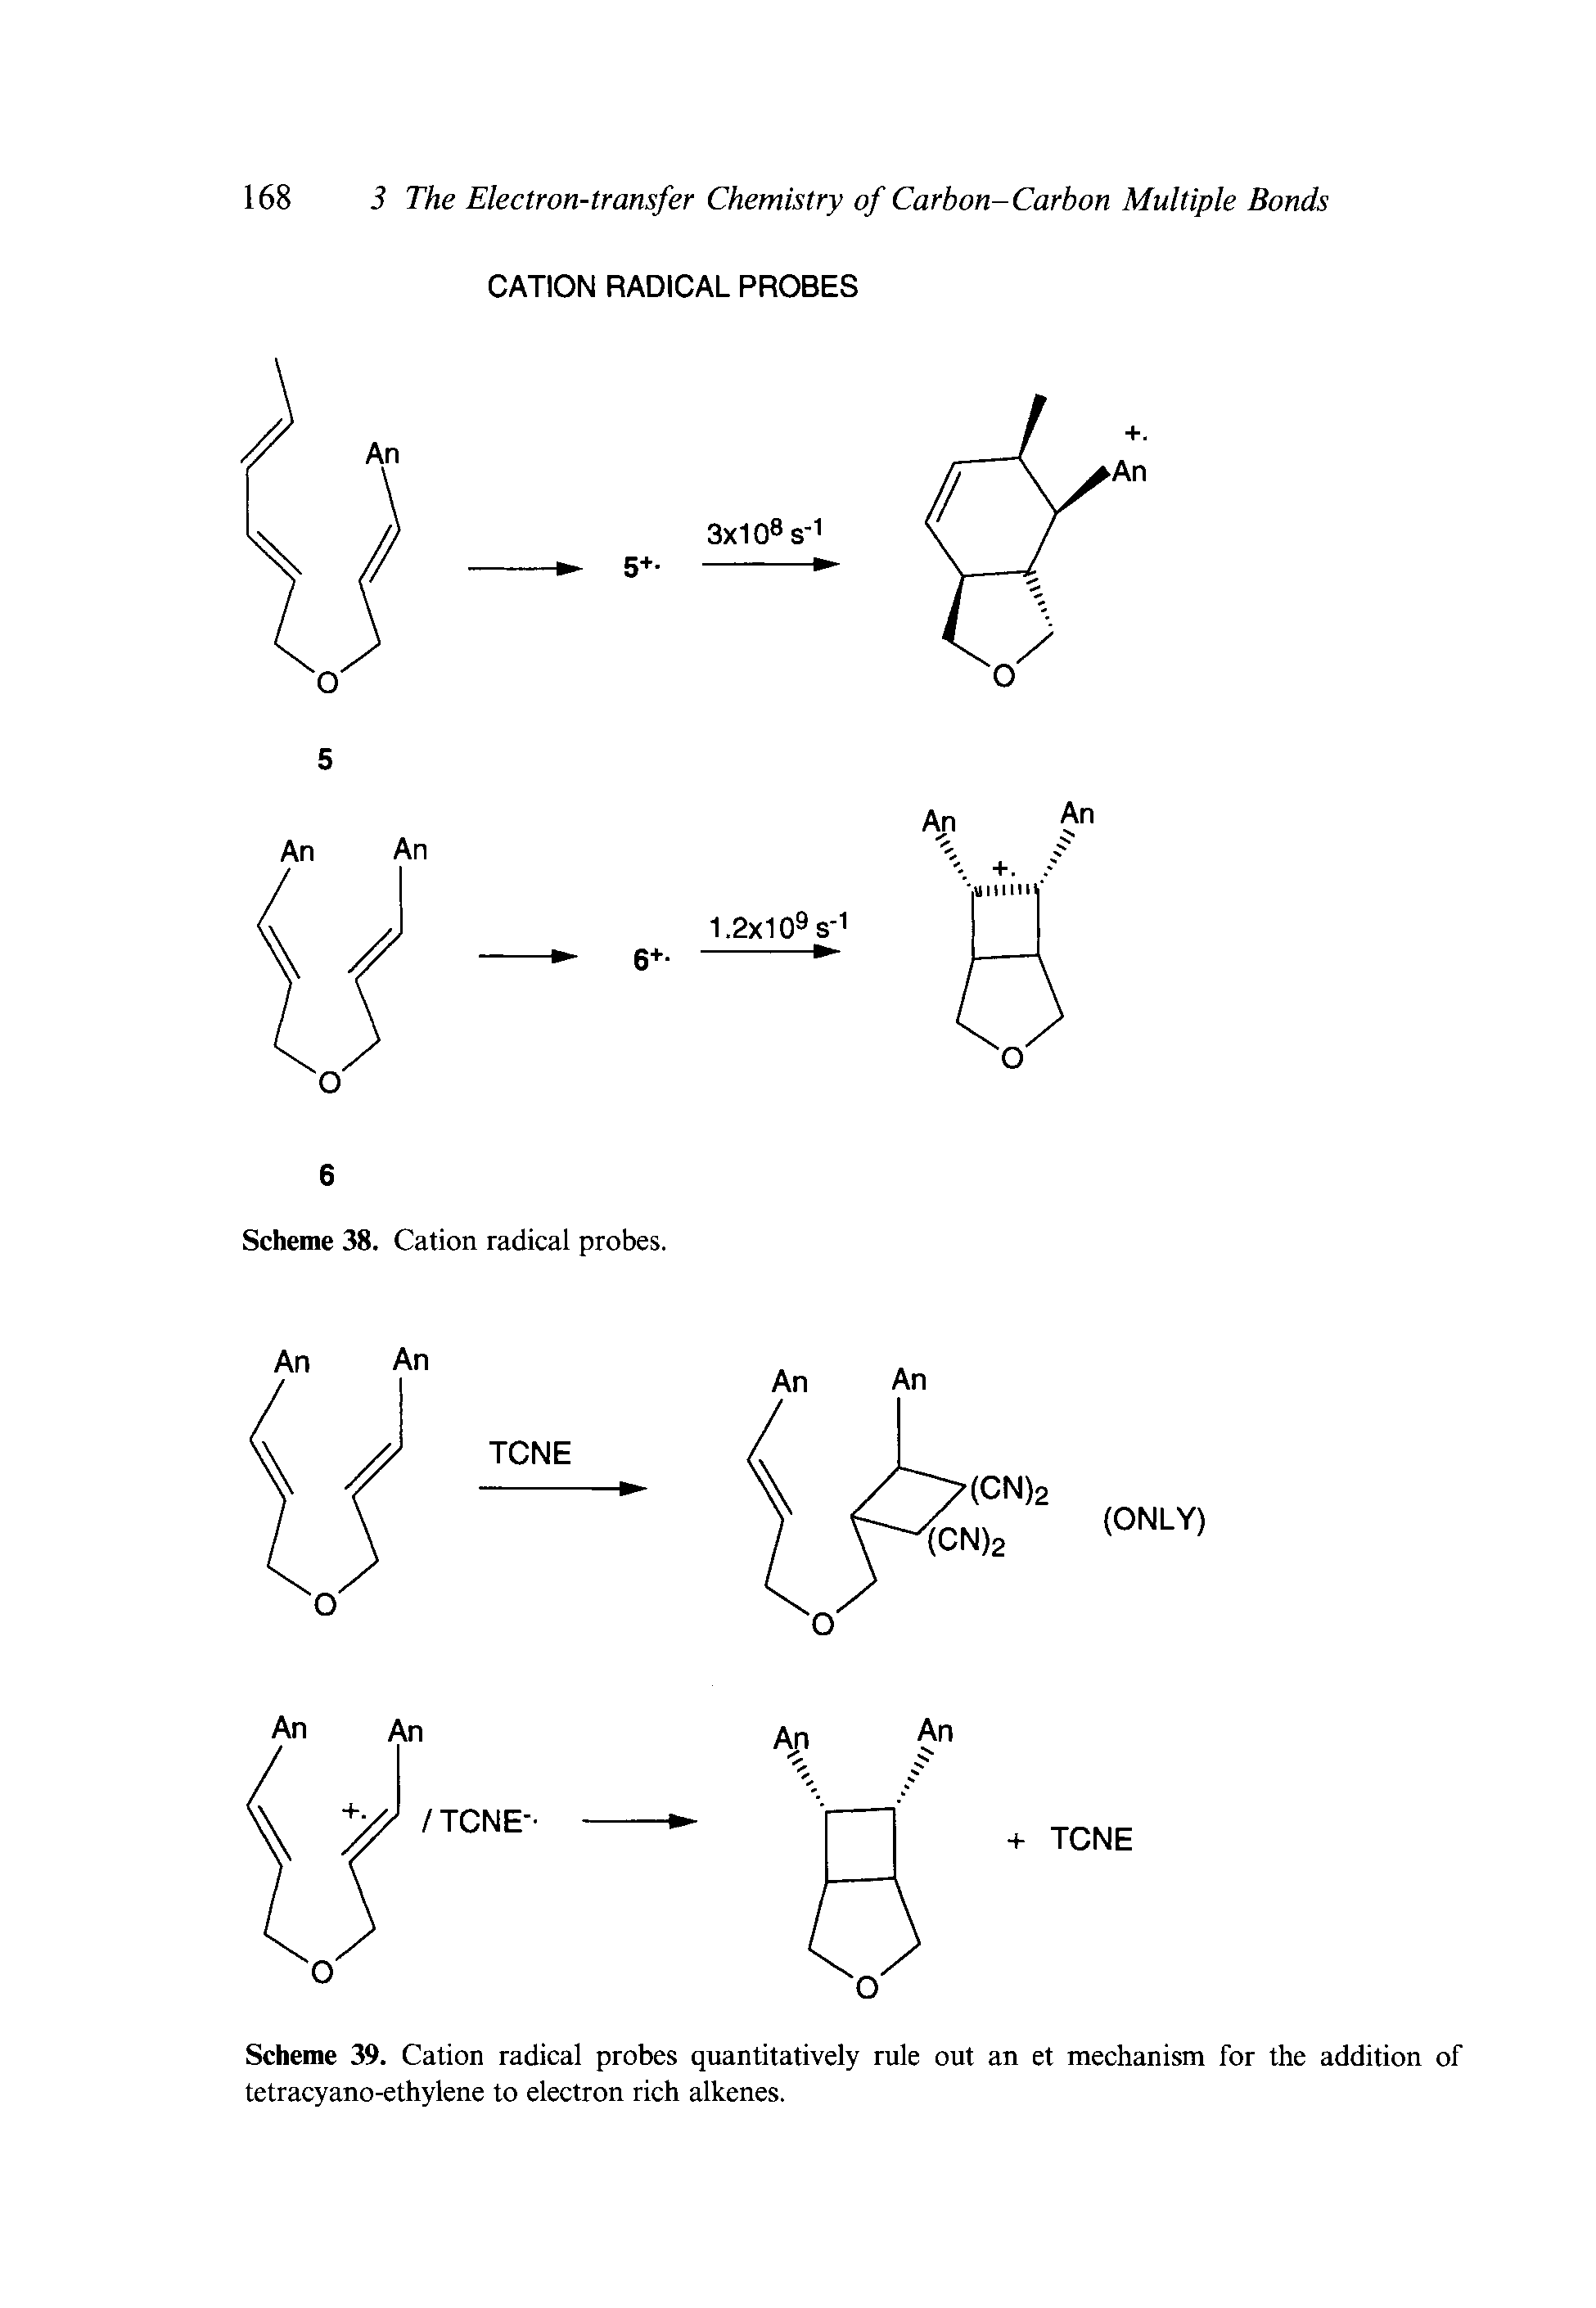 Scheme 39. Cation radical probes quantitatively rule out an et mechanism for the addition of tetracyano-ethylene to electron rich alkenes.